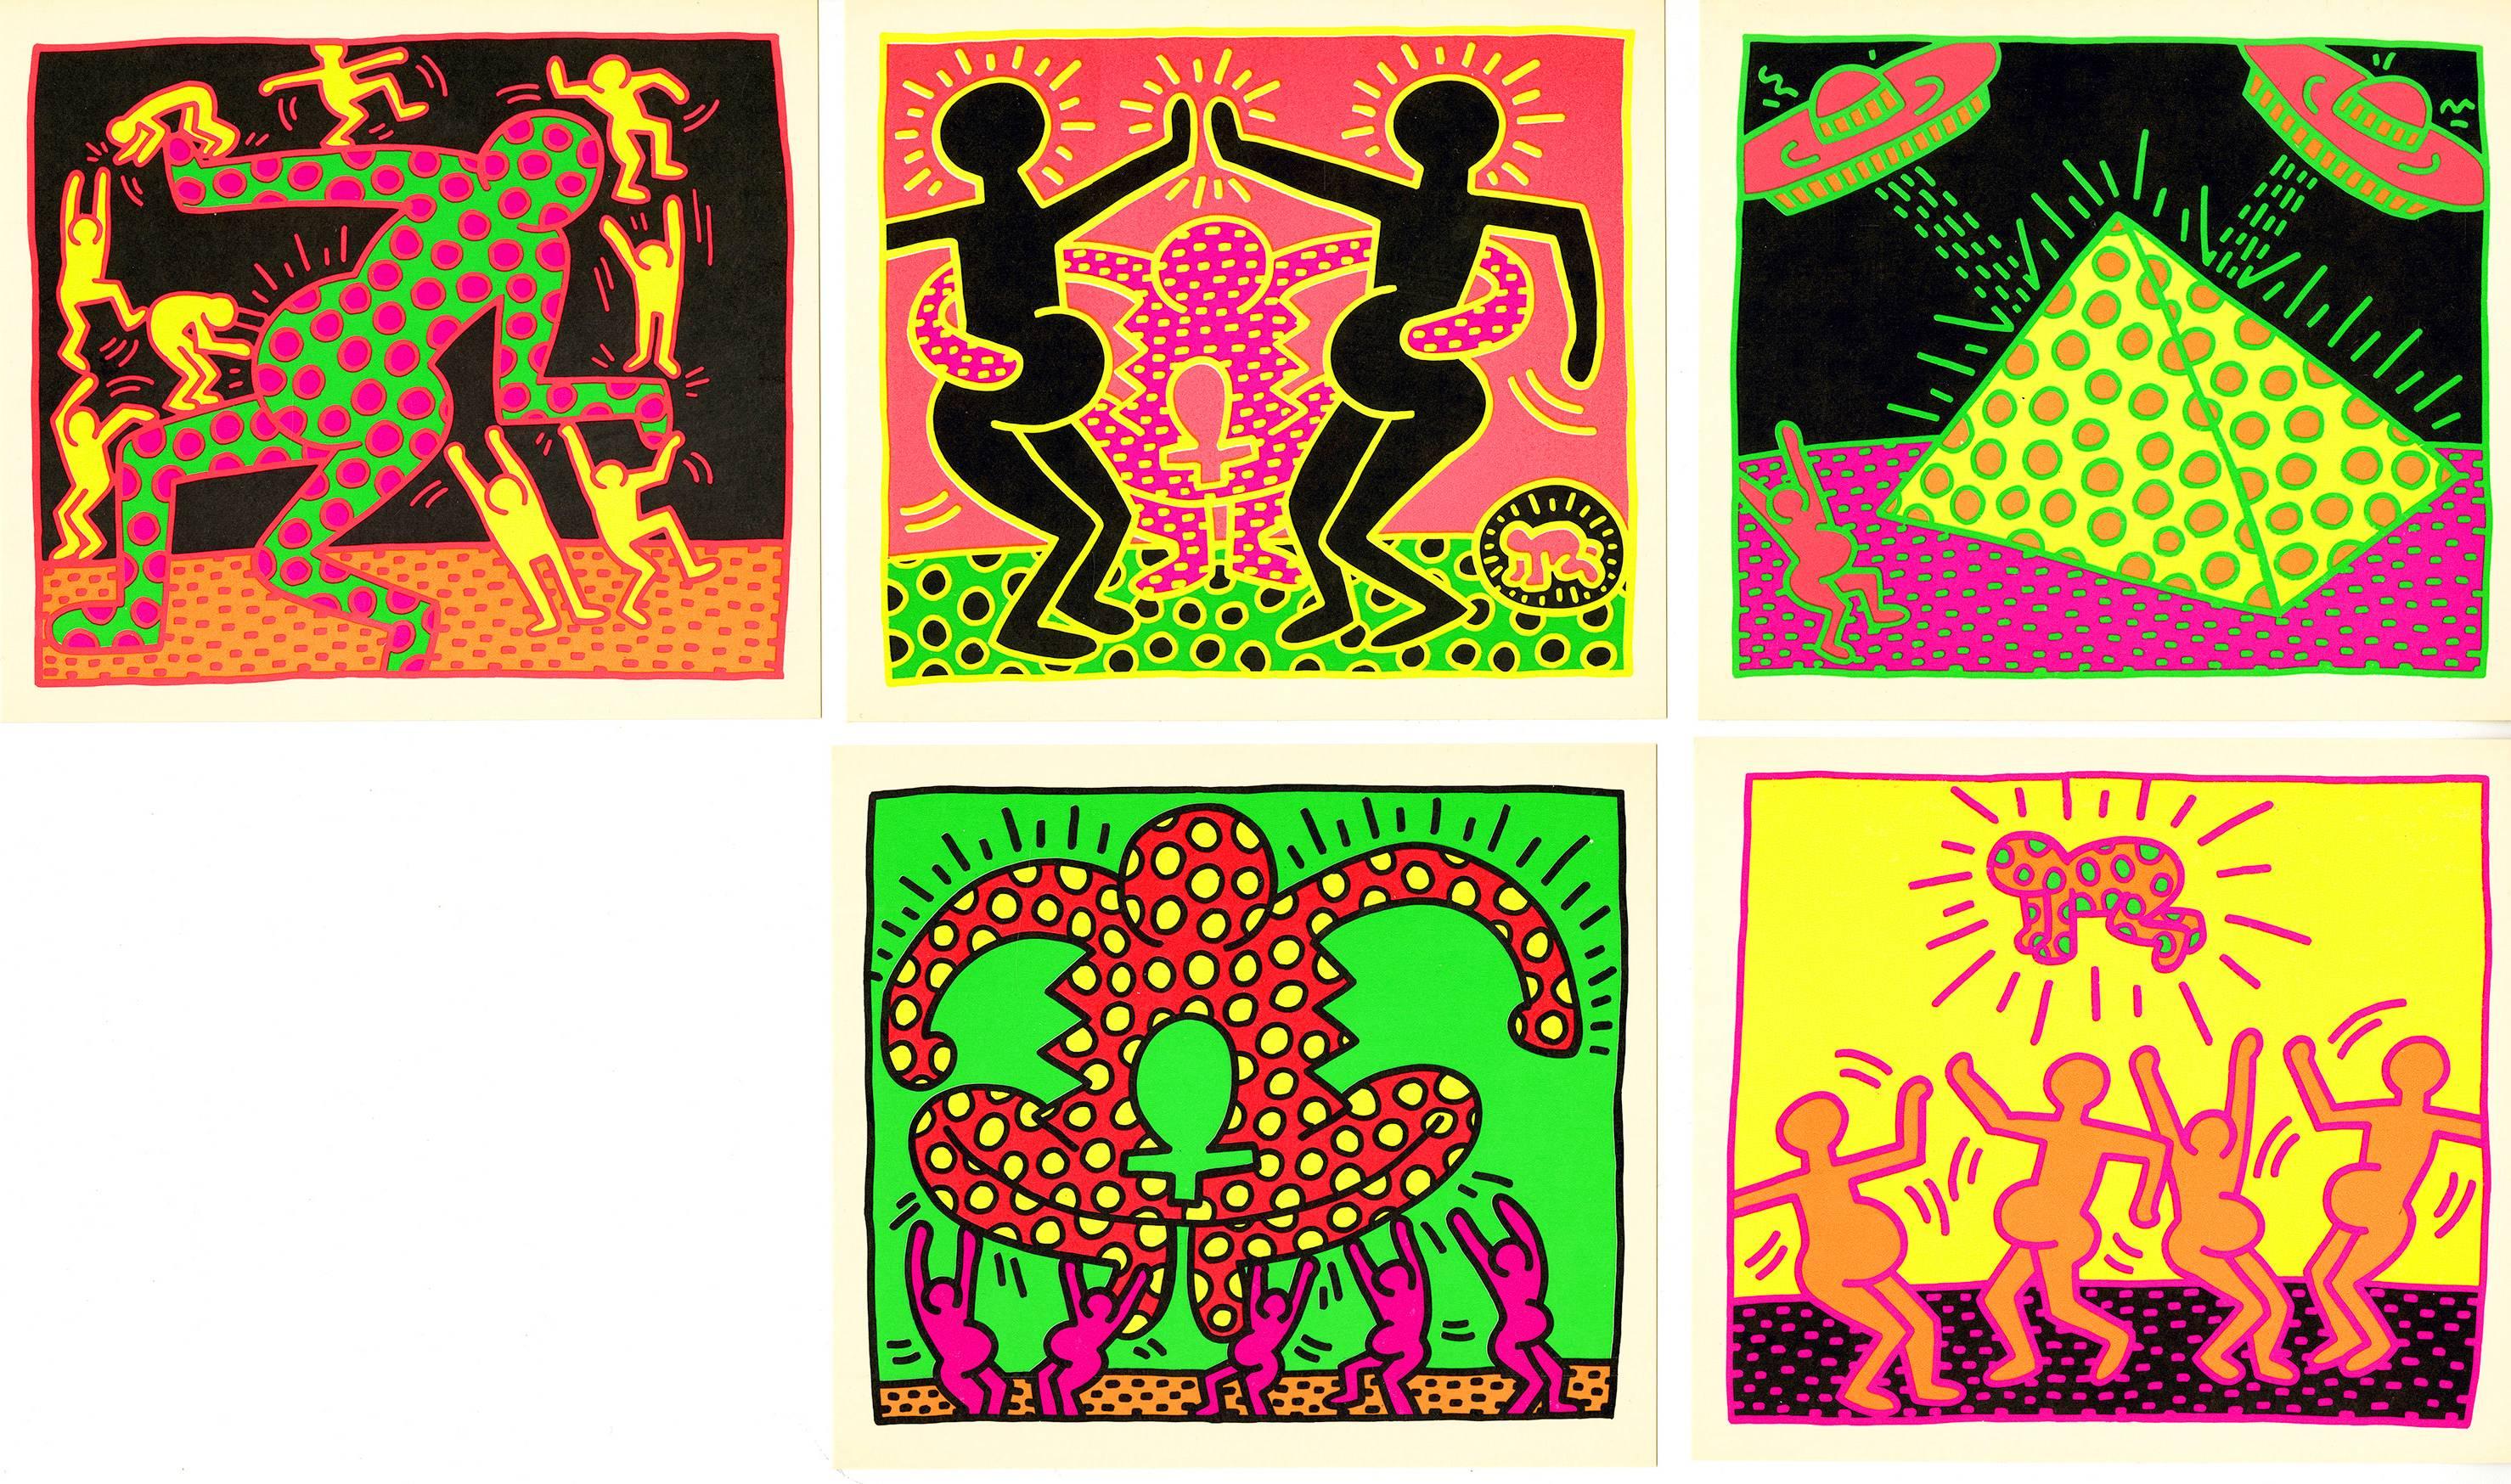 Keith Haring Fertility: set of 5 announcements 1983 (Keith Haring Tony Shafrazi) For Sale 5